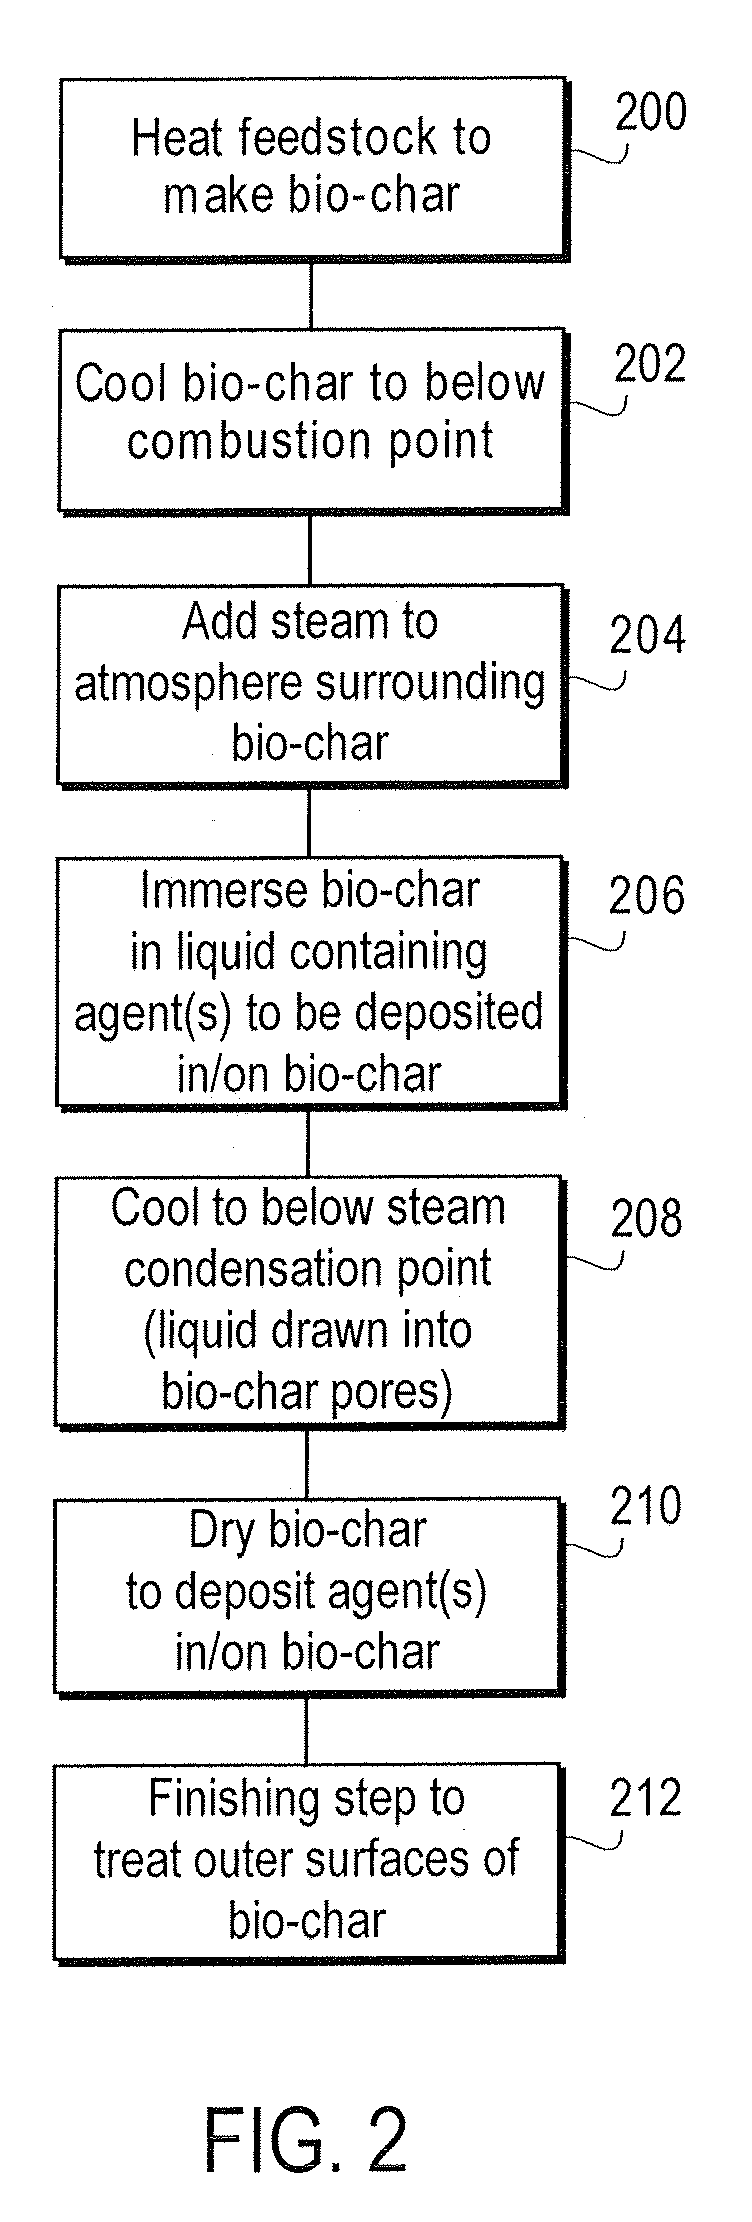 Method and apparatus for depositing agents upon and within bio-char